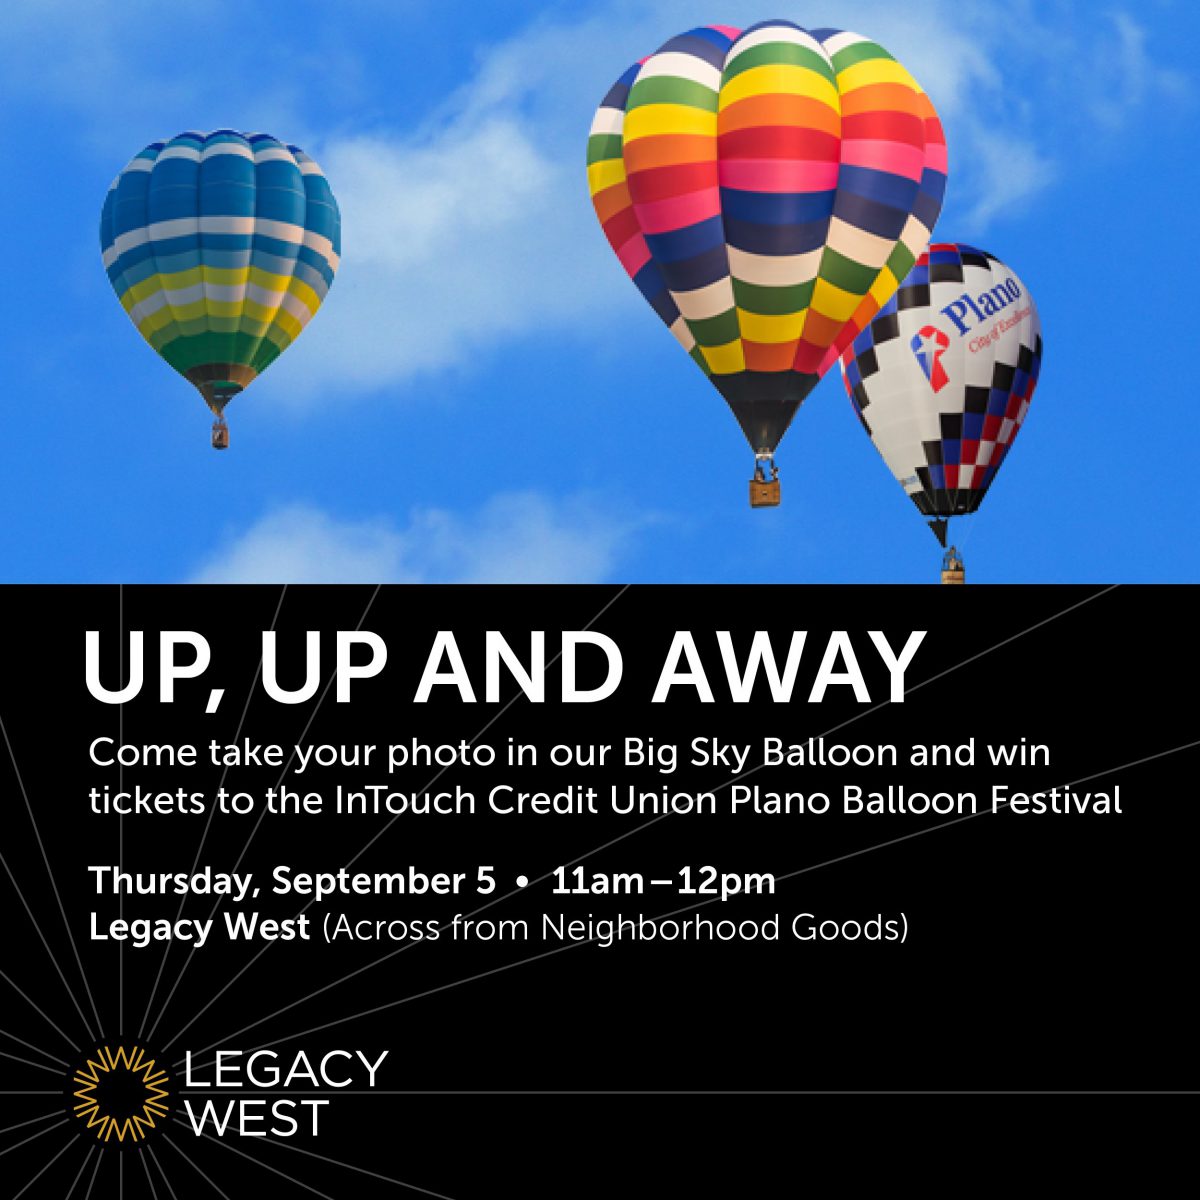 SOAR TO LEGACY WEST FOR FREE FESTIVAL TICKETS